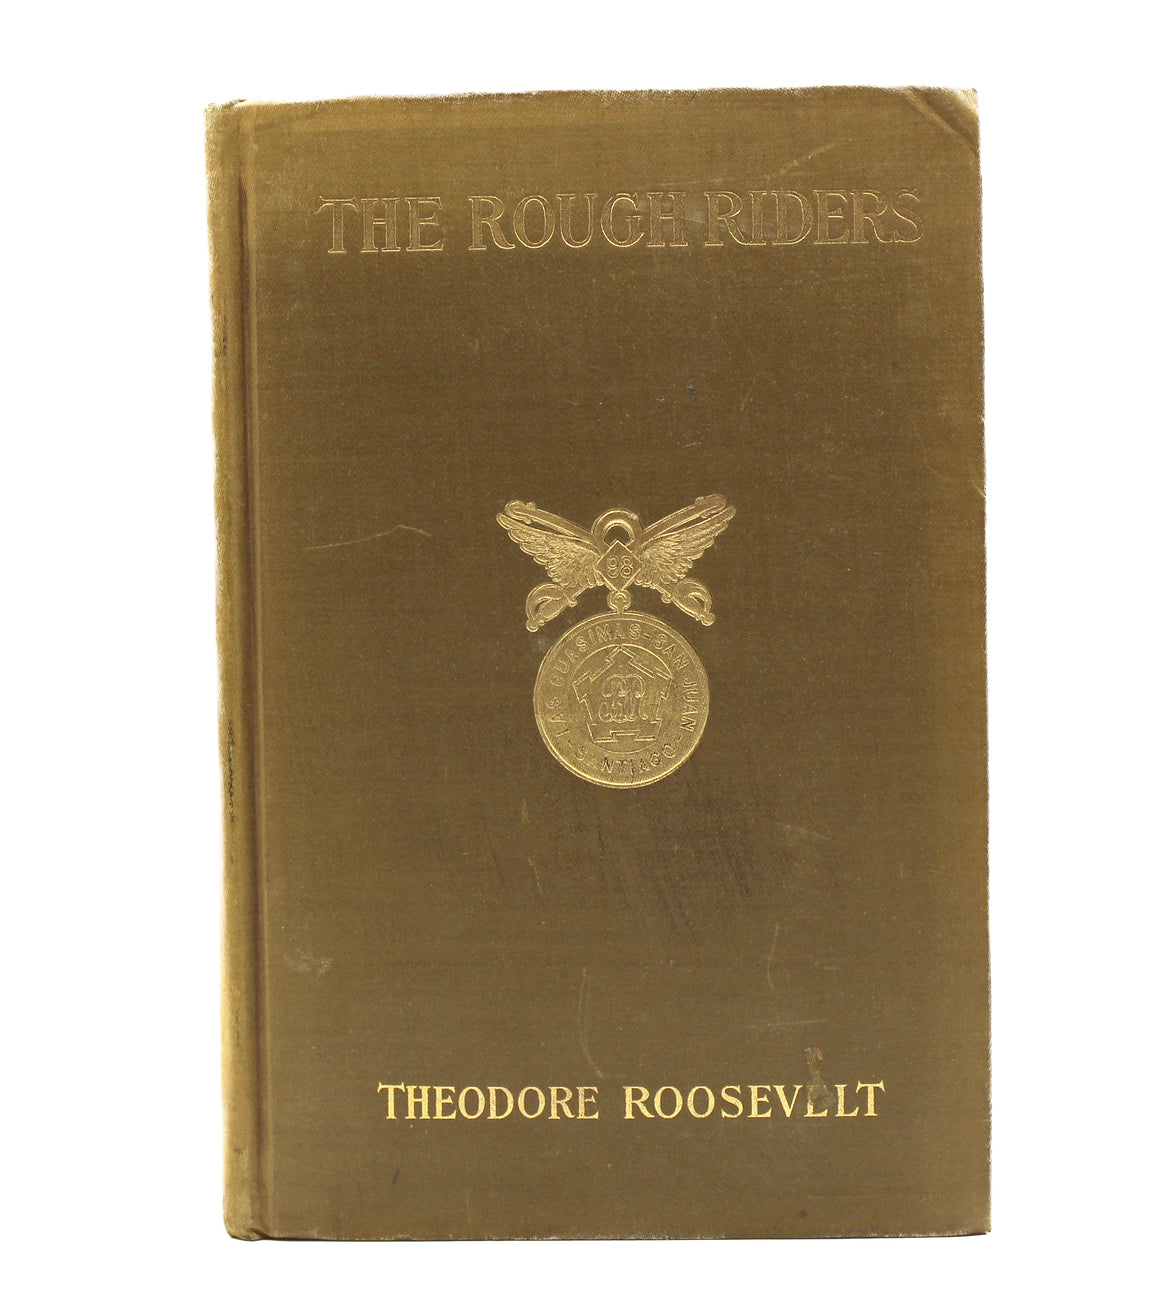 The Rough Riders by Theodore Roosevelt, First Edition, 1899